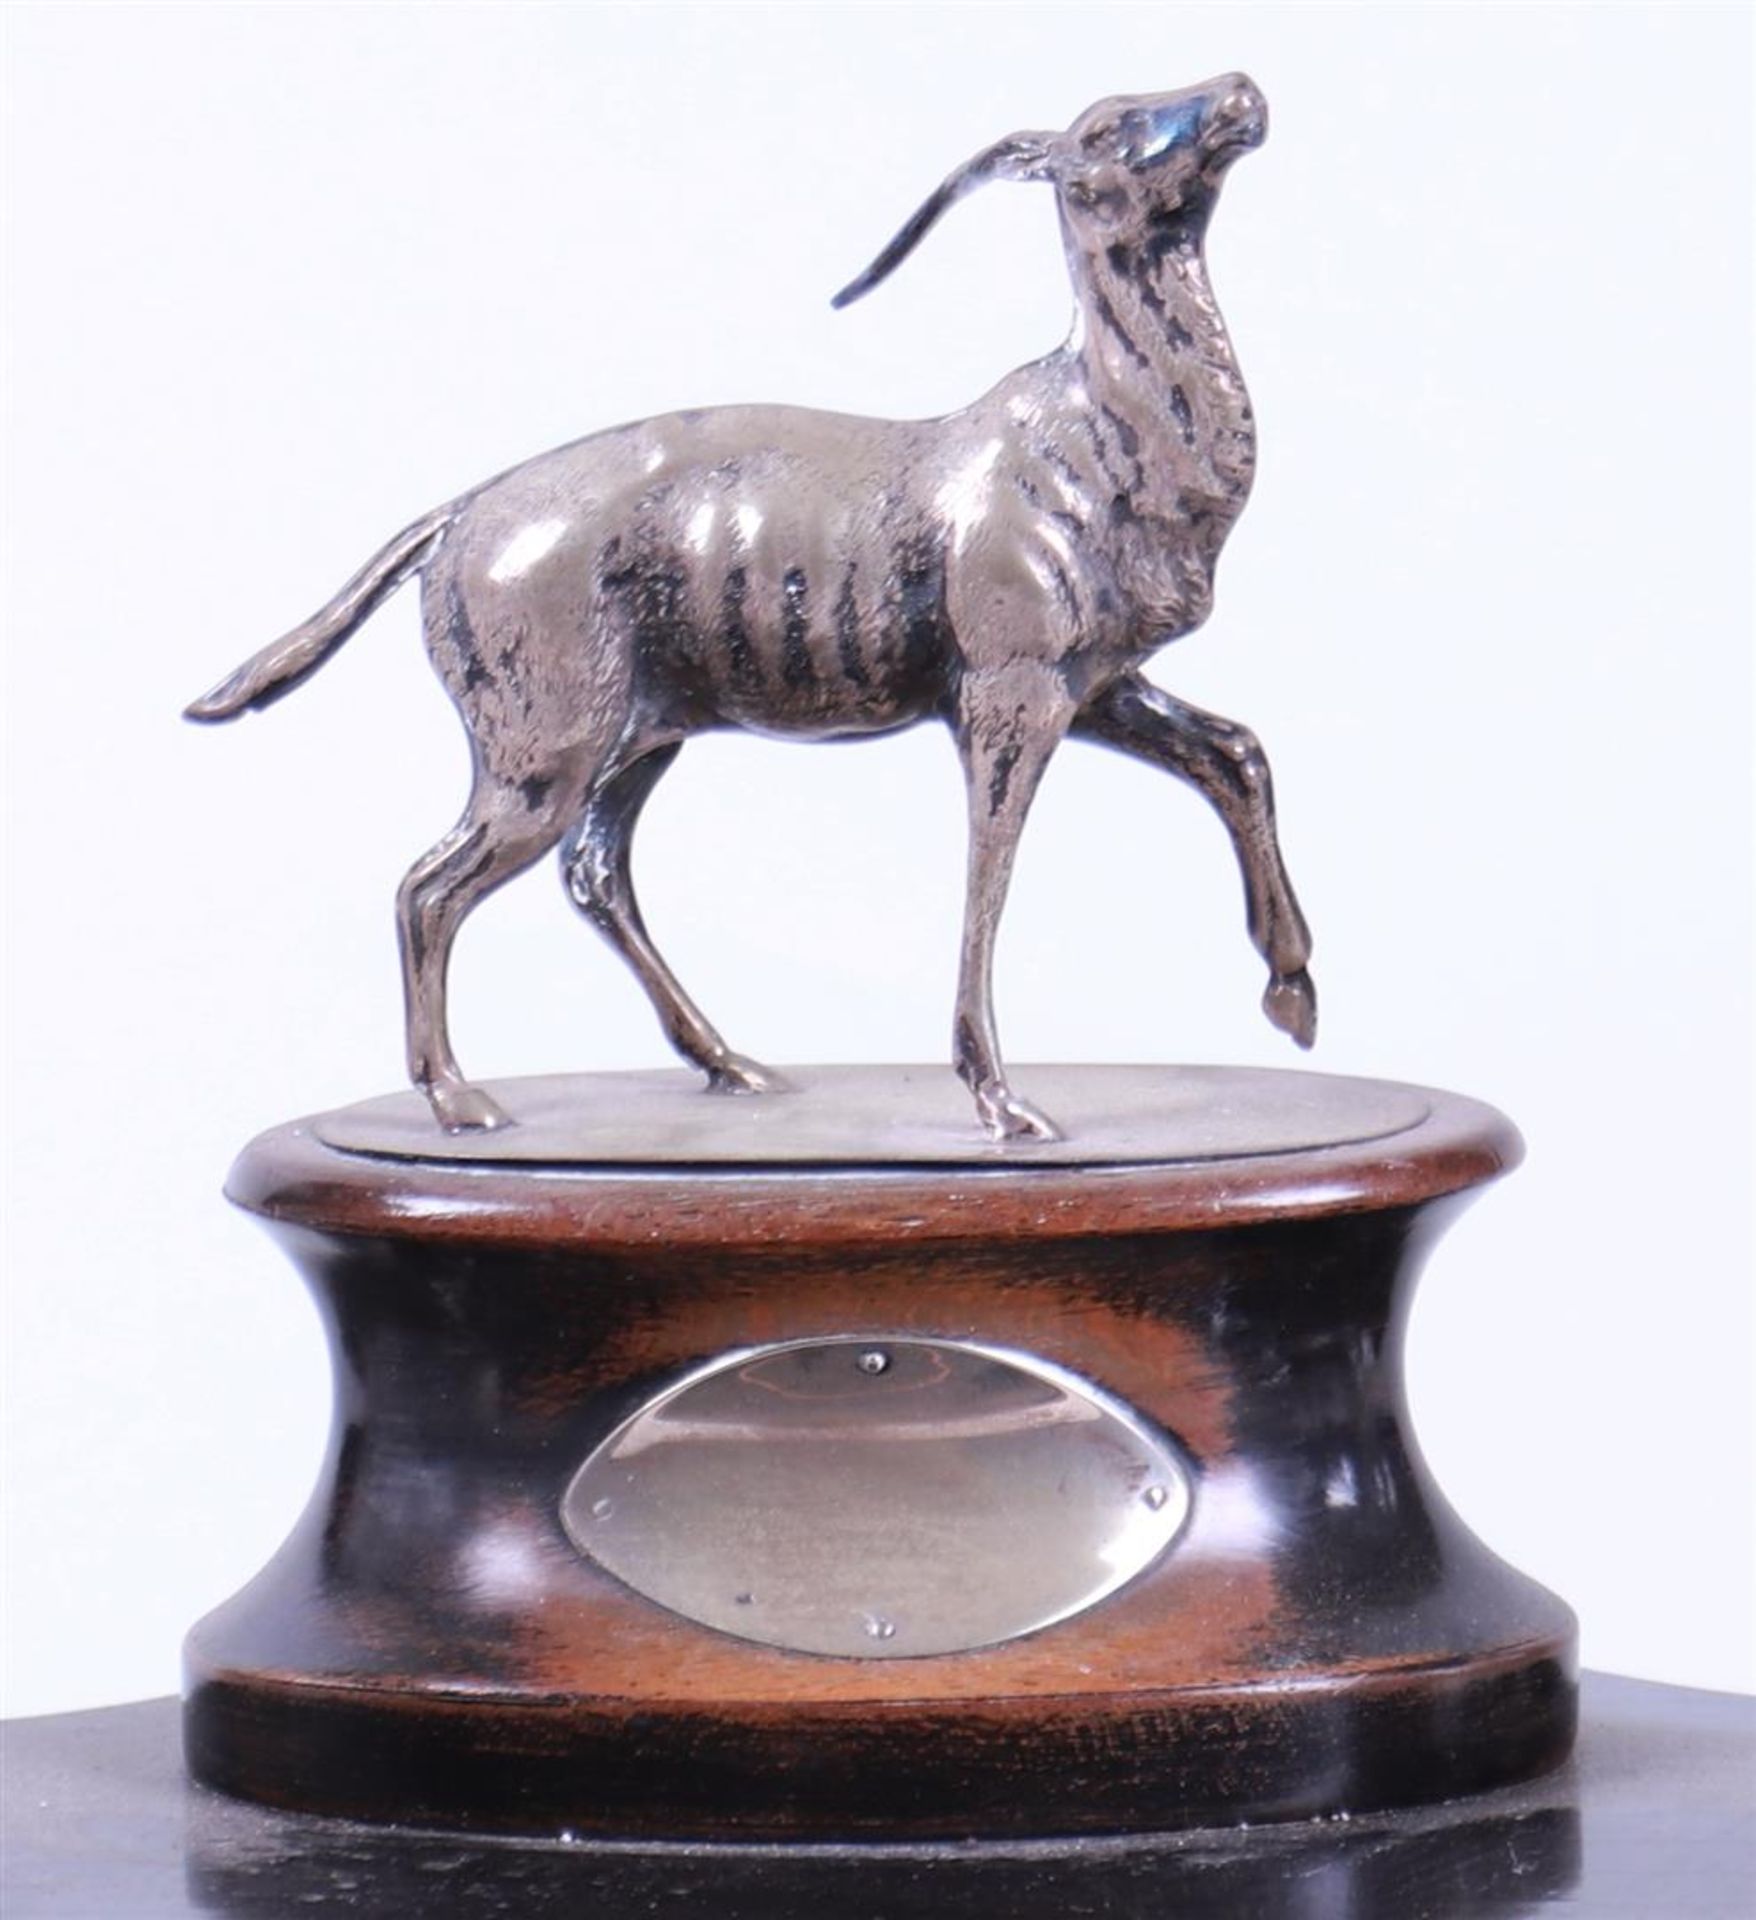 19th Century Inkstand with Silver Deer and Lids on Jars - Image 2 of 3